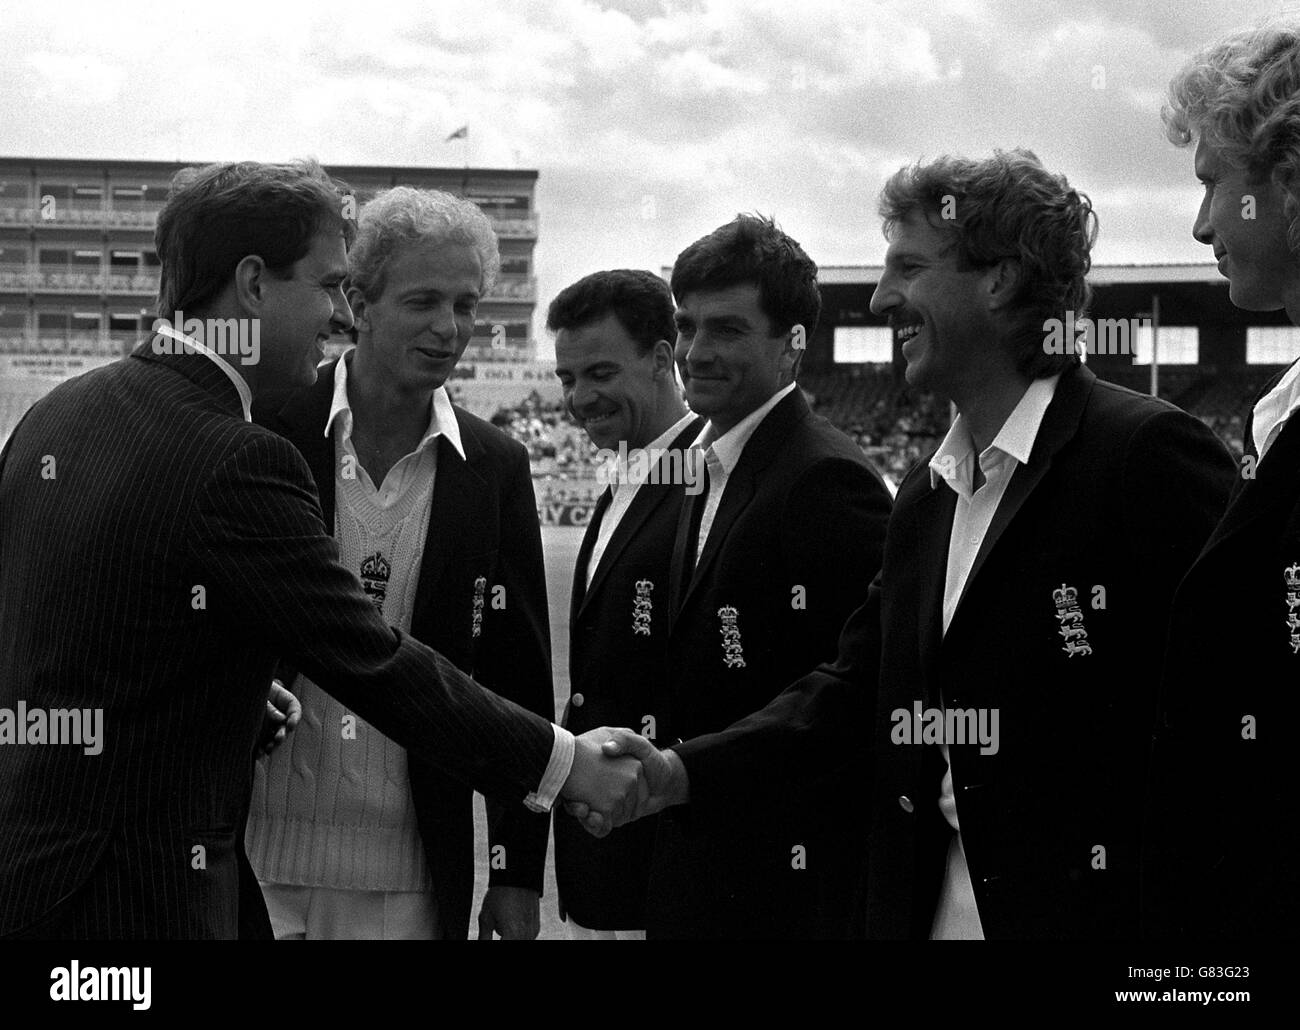 Cricket - Fourth Cornhill Test - England v Australia - Old Trafford. England Cricket captain David Gower (2nd left) introduces all-rounder Ian Botham to the Duke of York (L) during the lunch interval. Stock Photo